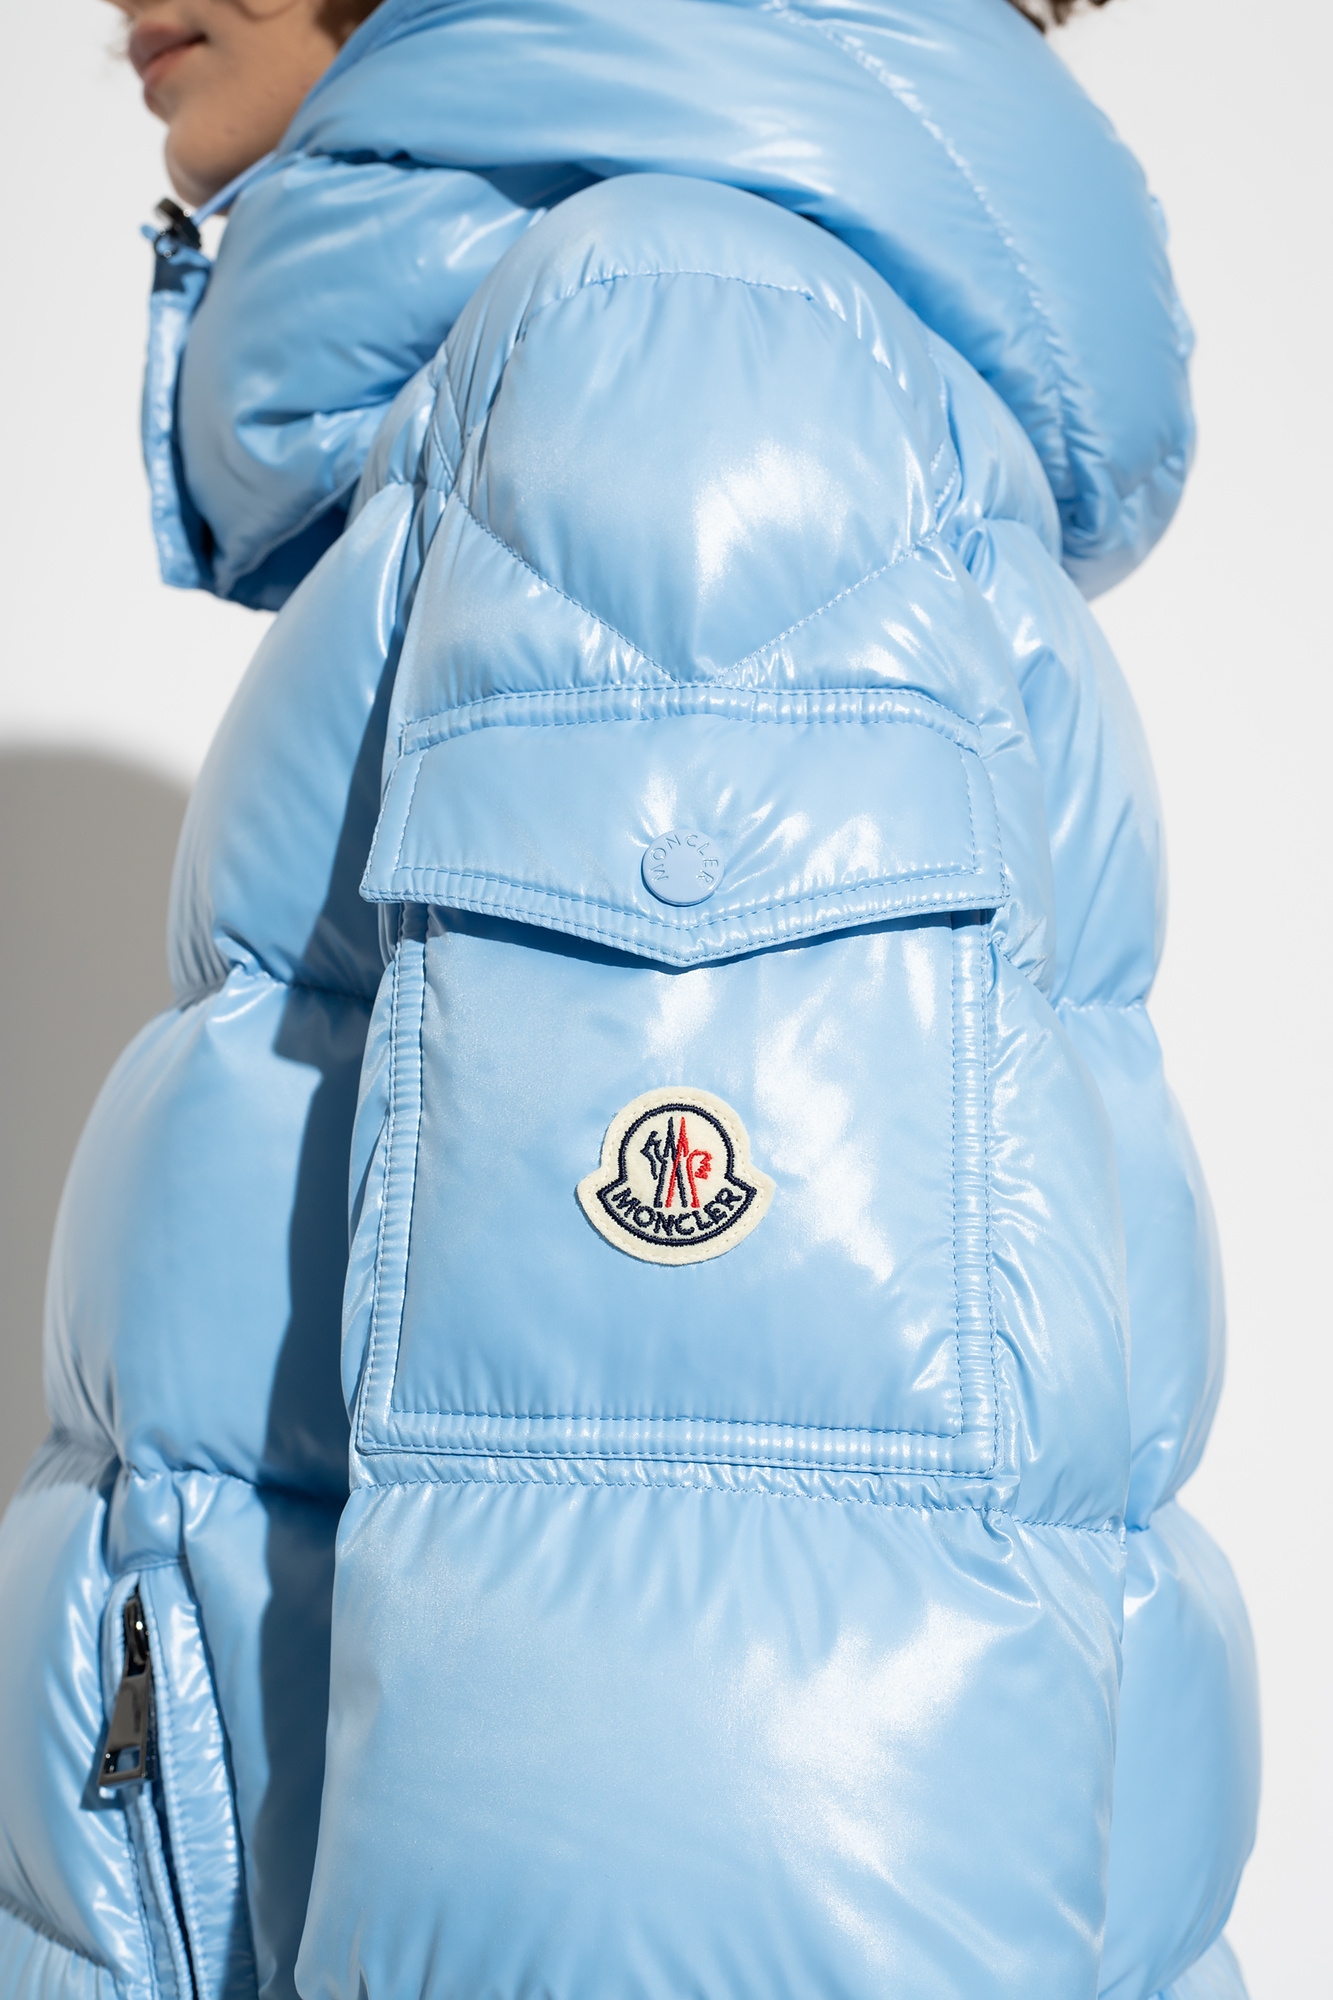 Moncler ‘Maire’ down low jacket